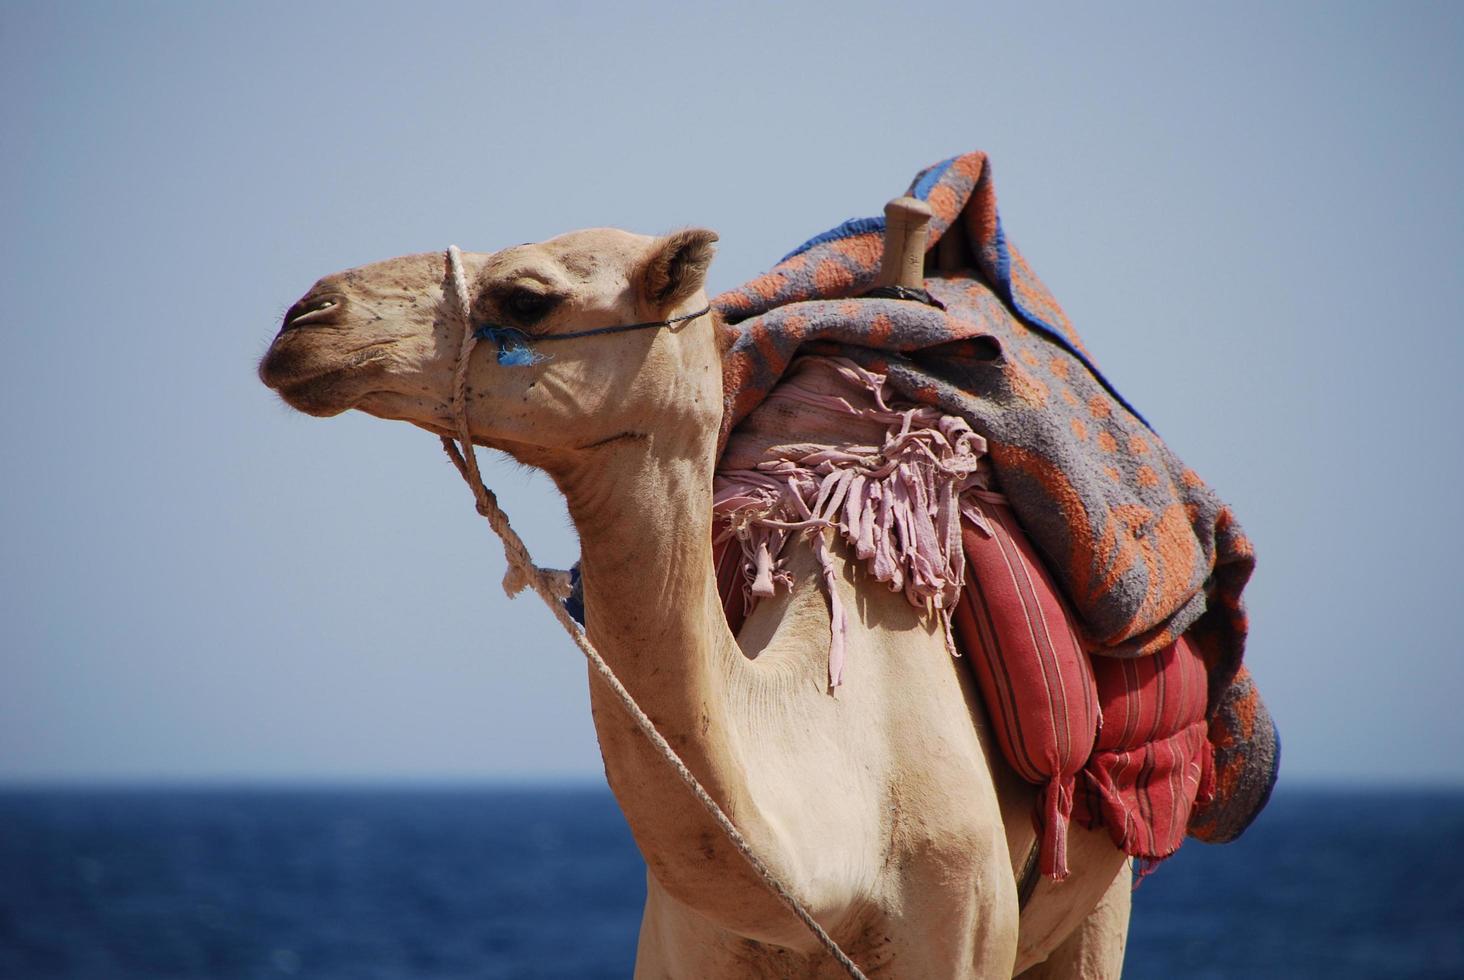 camel on the beach on holiday in egypt looks photo